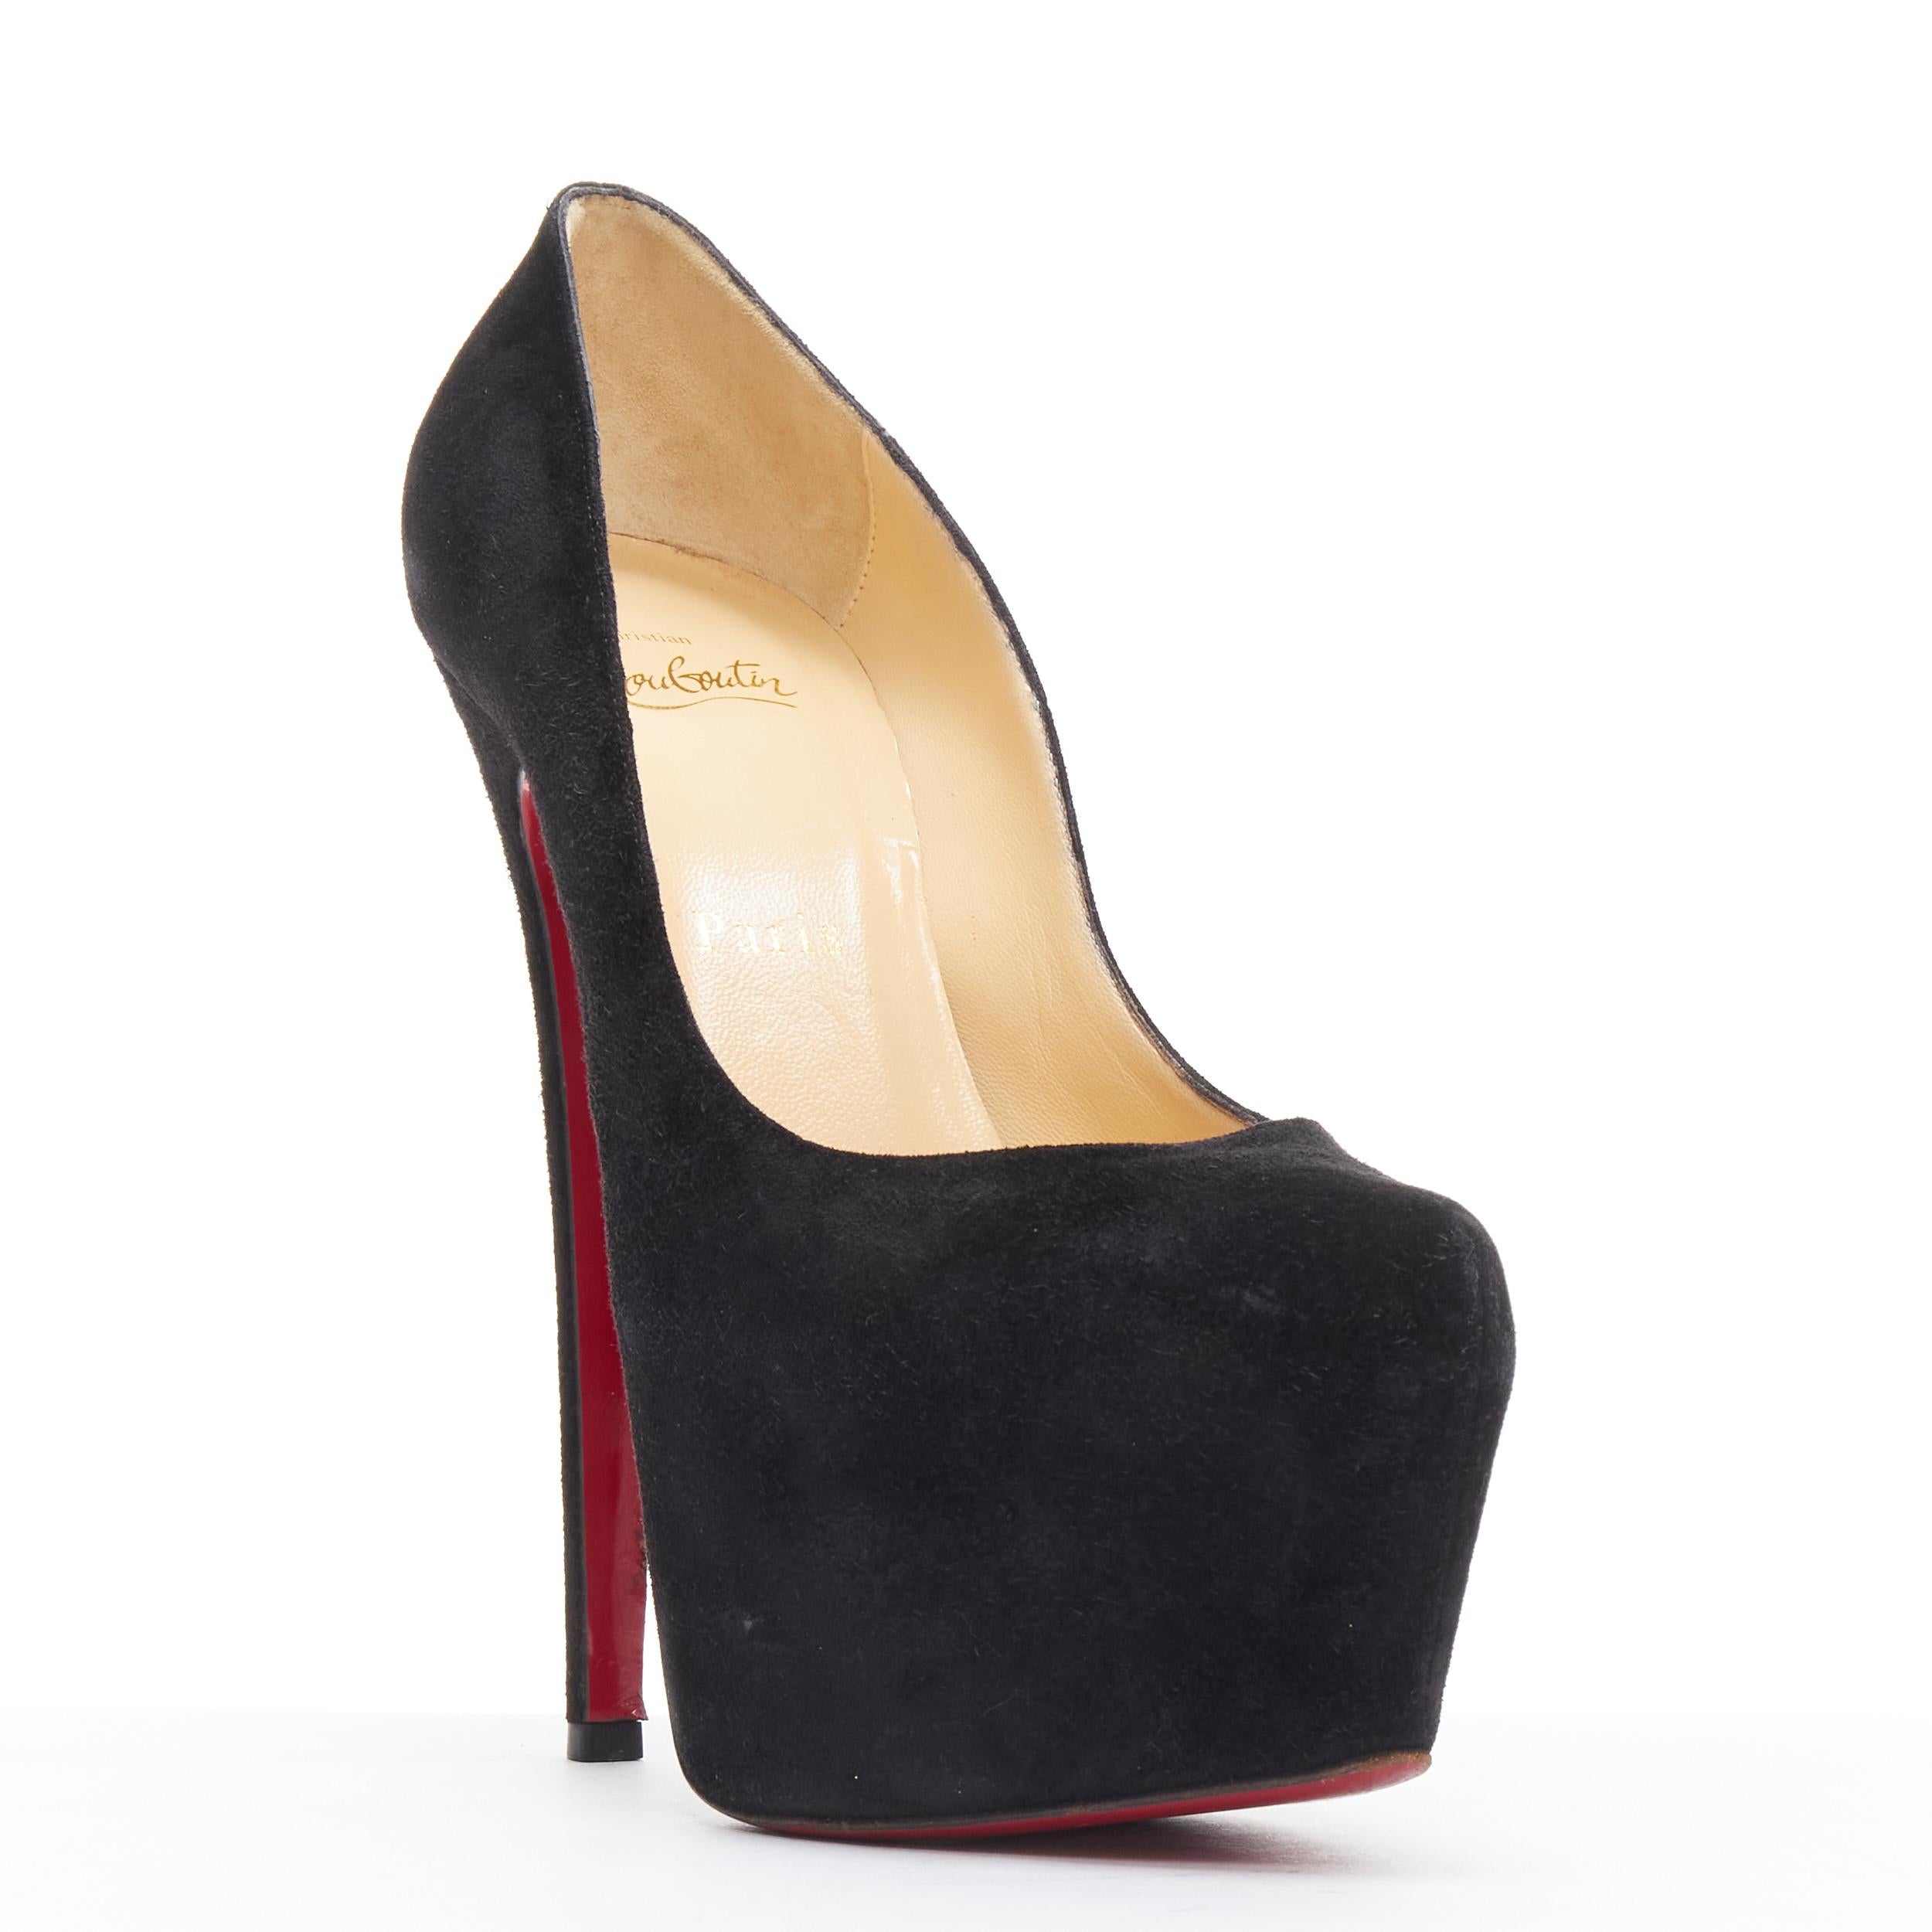 CHRISTIAN LOUBOUTIN Daffodile 160 black suede almond toe platform pump EU38 
Reference: TGAS/B01518 
Brand: Christian Louboutin 
Designer: Christian Louboutin 
Model: Daffodile 160 
Material: Suede 
Color: Black 
Pattern: Solid 
Extra Detail: